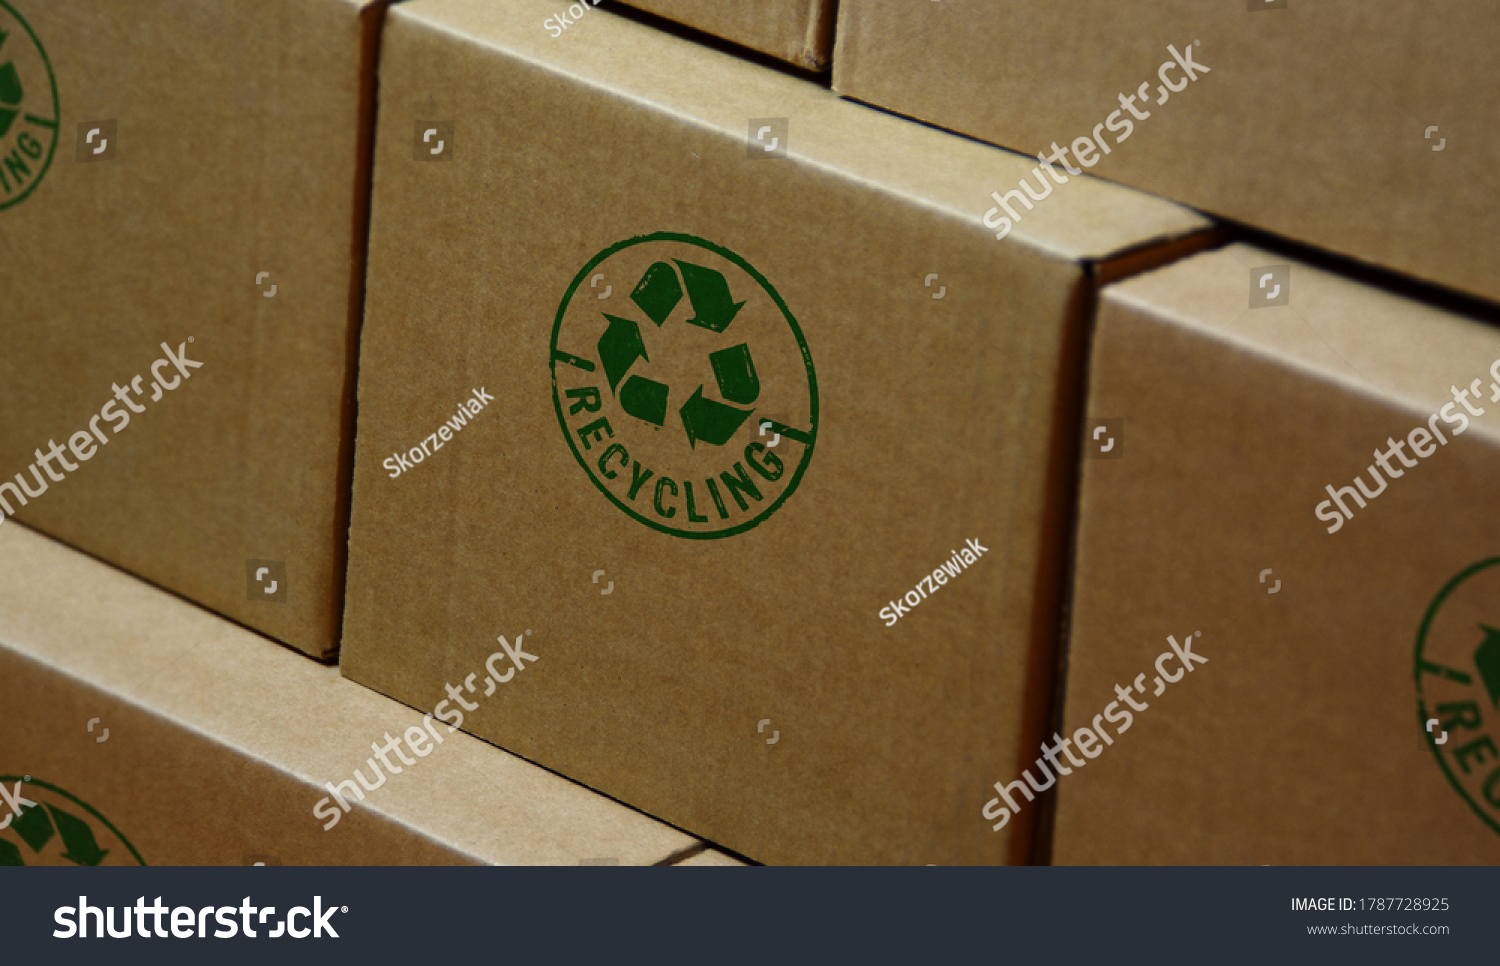 Recycling stamp printed on cardboard box. Recycle symbol, arrows, recyclable materials, environmental protection and earth safe concept. #1787728925